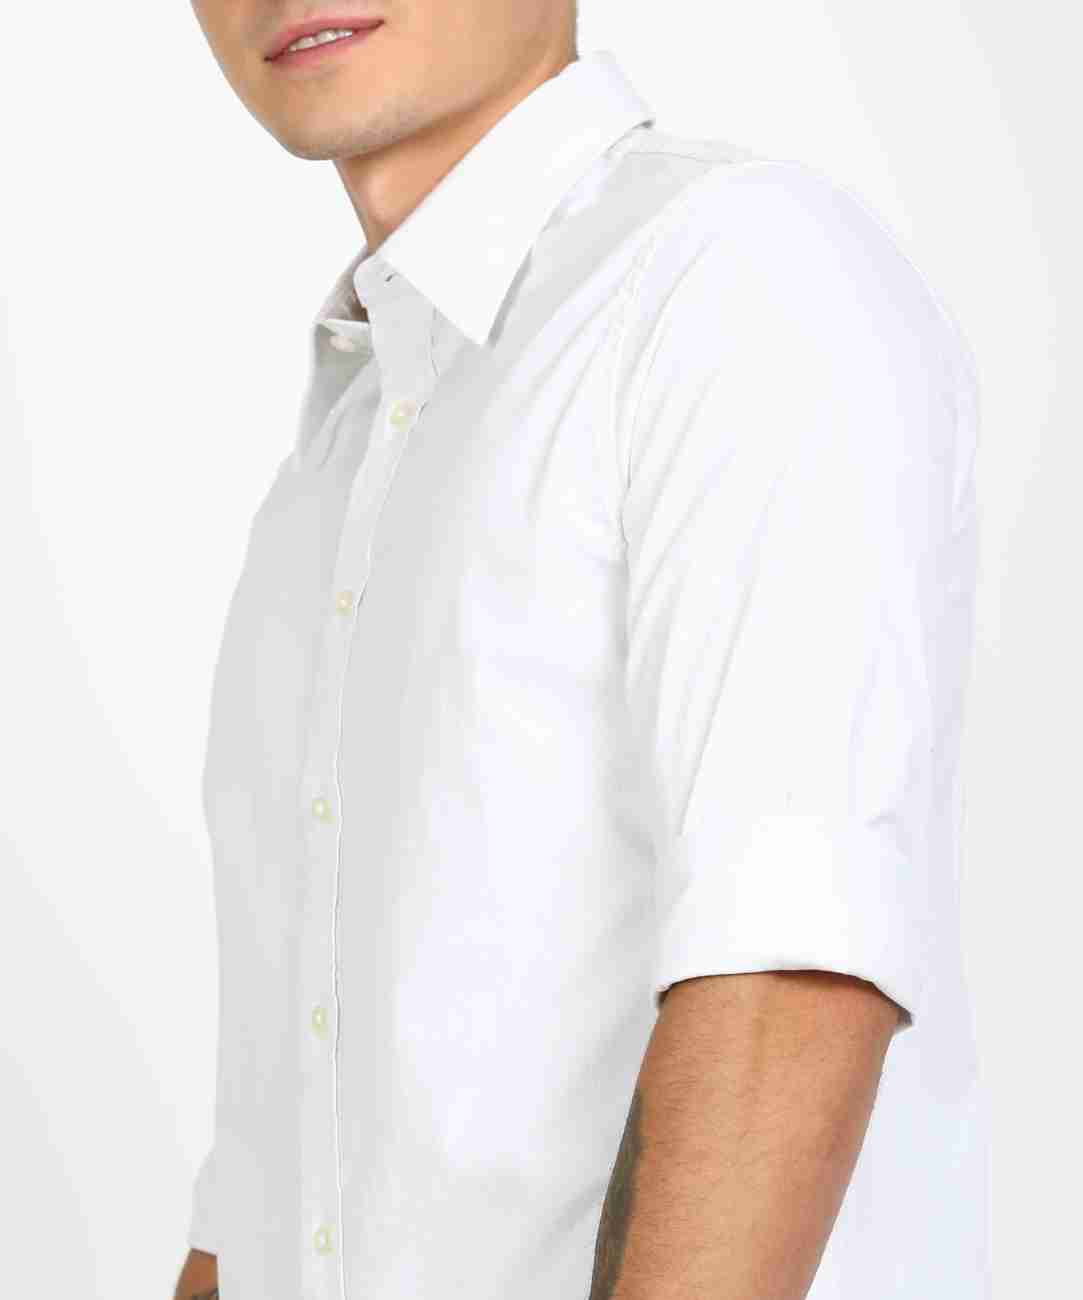 Calvin Klein Jeans Men Striped Casual White Shirt - Buy Calvin Klein Jeans  Men Striped Casual White Shirt Online at Best Prices in India